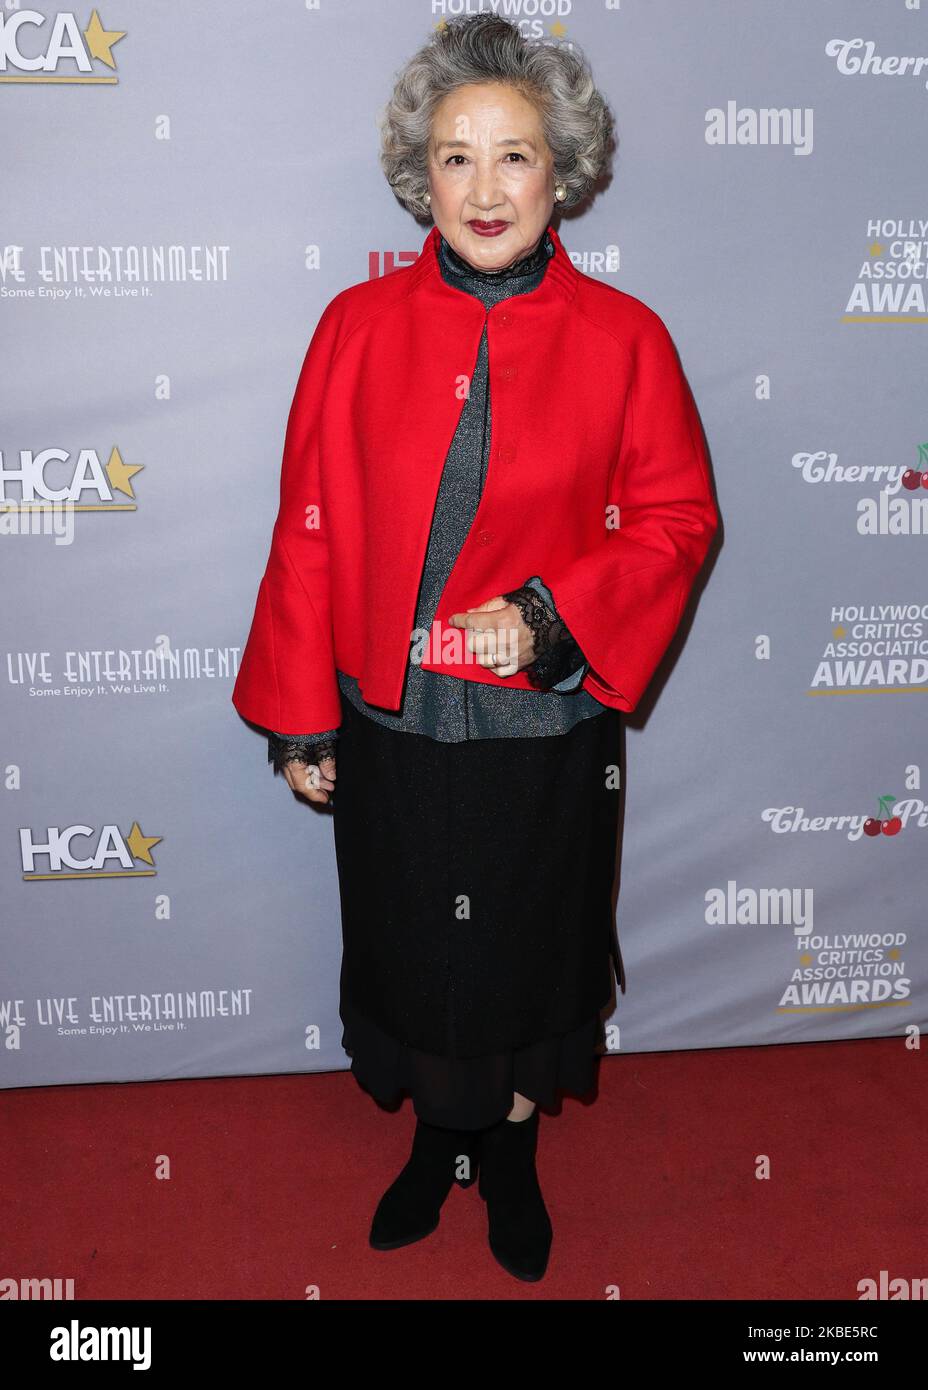 HOLLYWOOD, LOS ANGELES, CALIFORNIA, USA - JANUARY 09: Shuzhen Zhao arrives at the 3rd Annual Hollywood Critics' Awards held at the Taglyan Cultural Complex on January 9, 2020 in Hollywood, Los Angeles, California, United States. (Photo by Xavier Collin/Image Press Agency/NurPhoto) Stock Photo